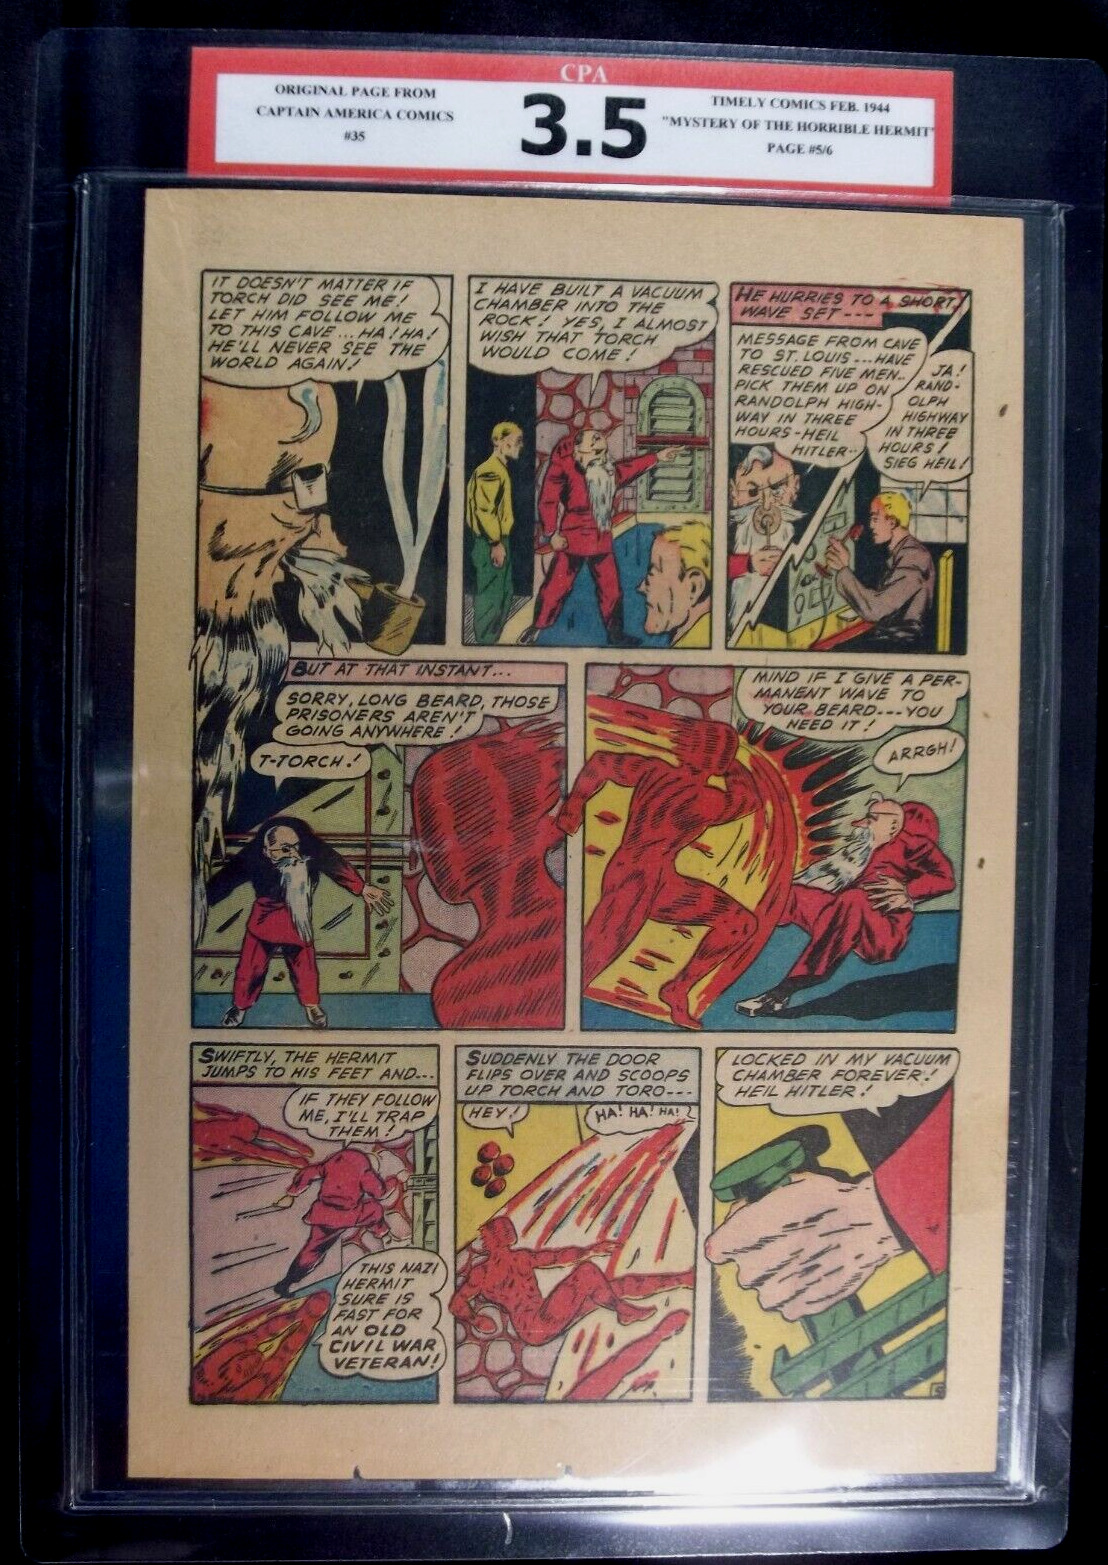 Captain America Comics #35 CPA 3.5 SINGLE PAGE #5/6 Human Torch story